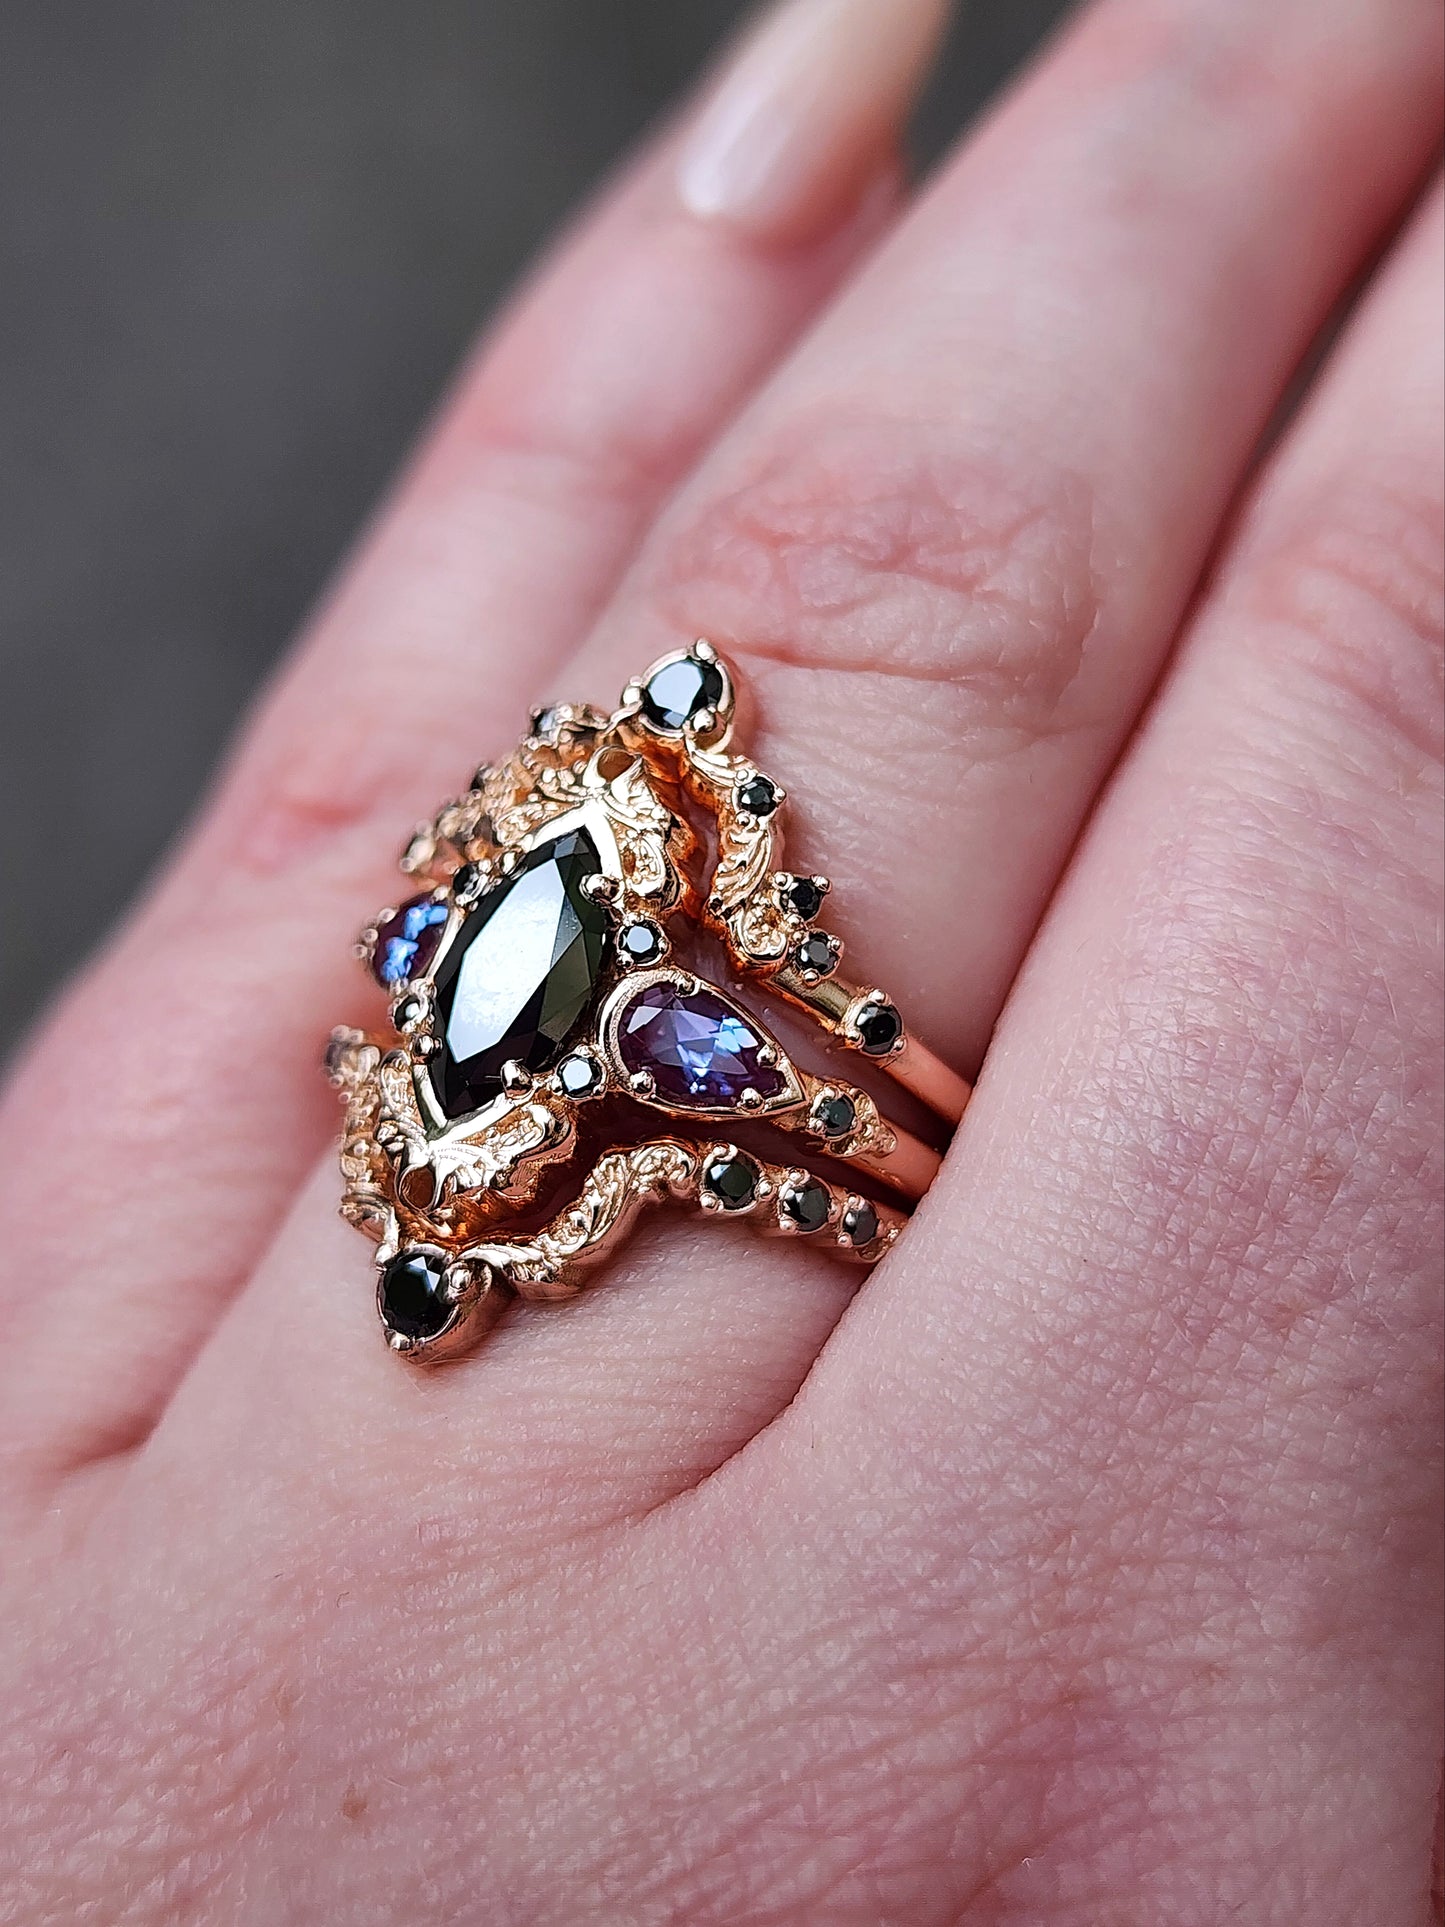 Odile Black Diamond Marquise Engagement Ring 3 Piece Set with Pear Side Stones and Gold Scrolls - Gothic Fairytale Dark Romance 14k Rose Gold Handmade Ring